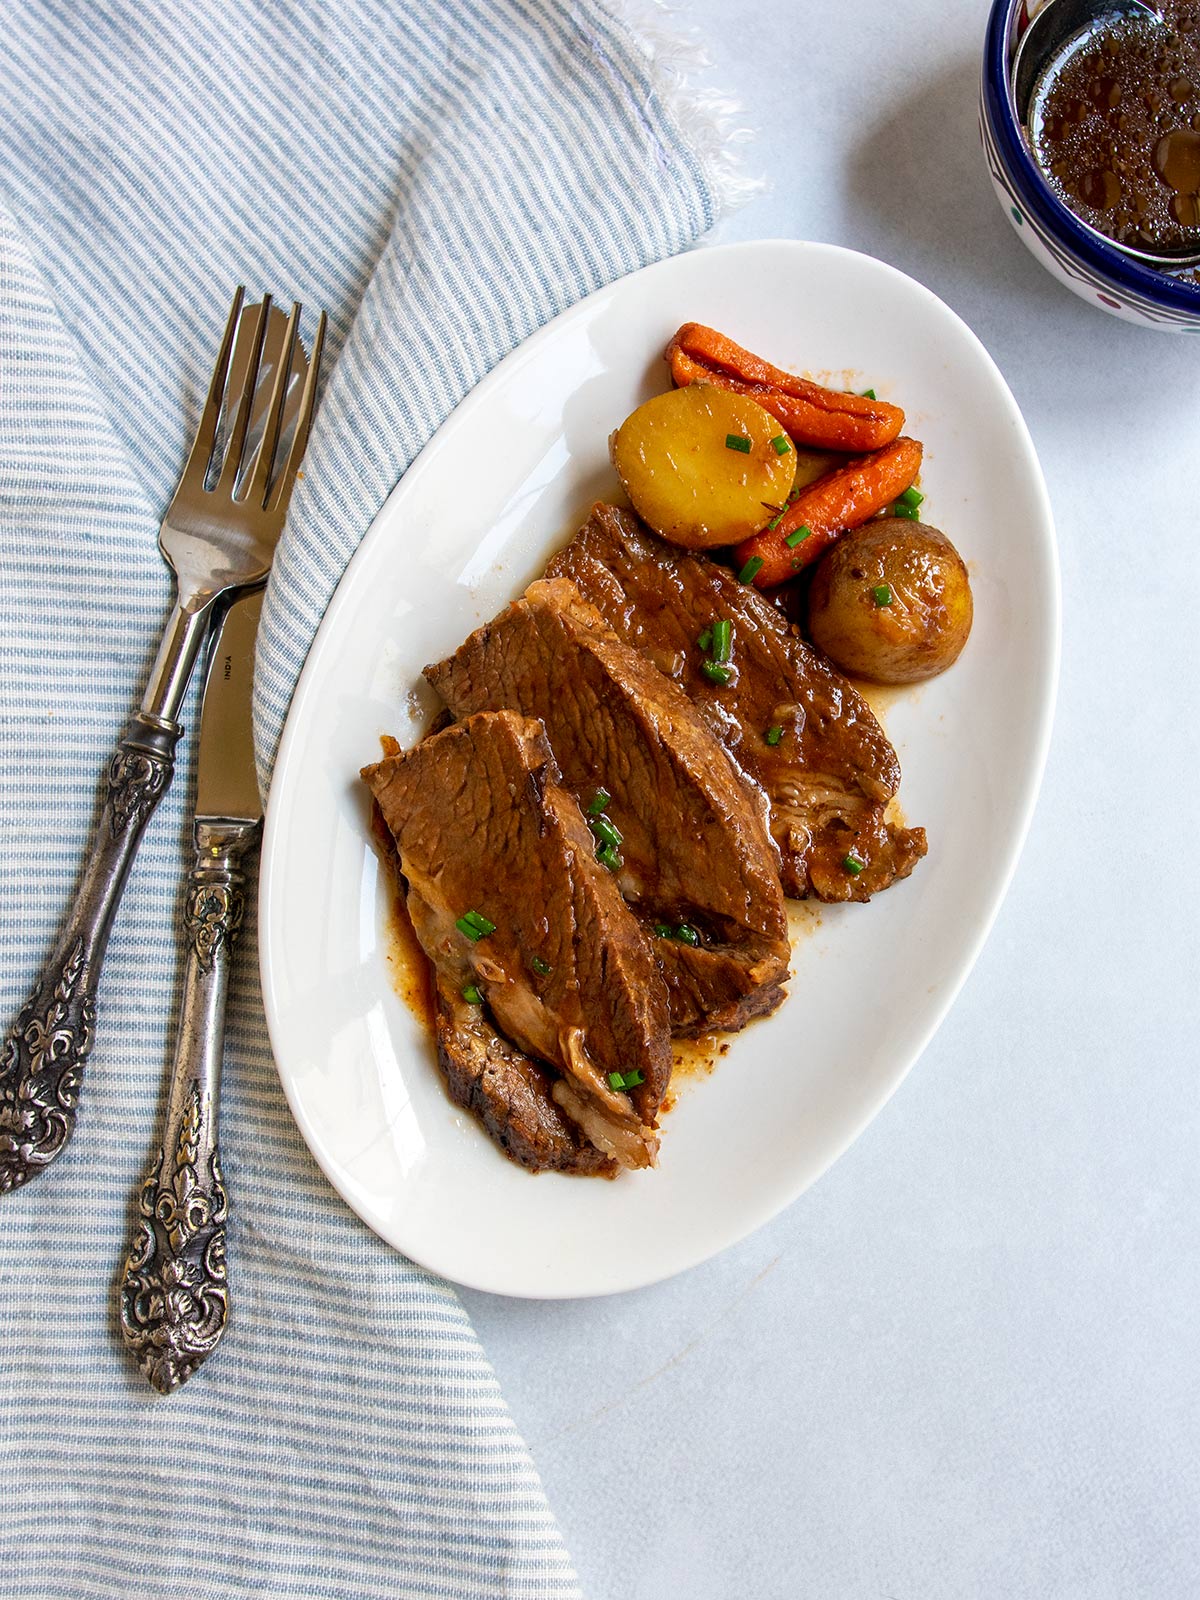 Sliced Jewish brisket on a small white plate with potatoes and carrots and knife and fork nearby.